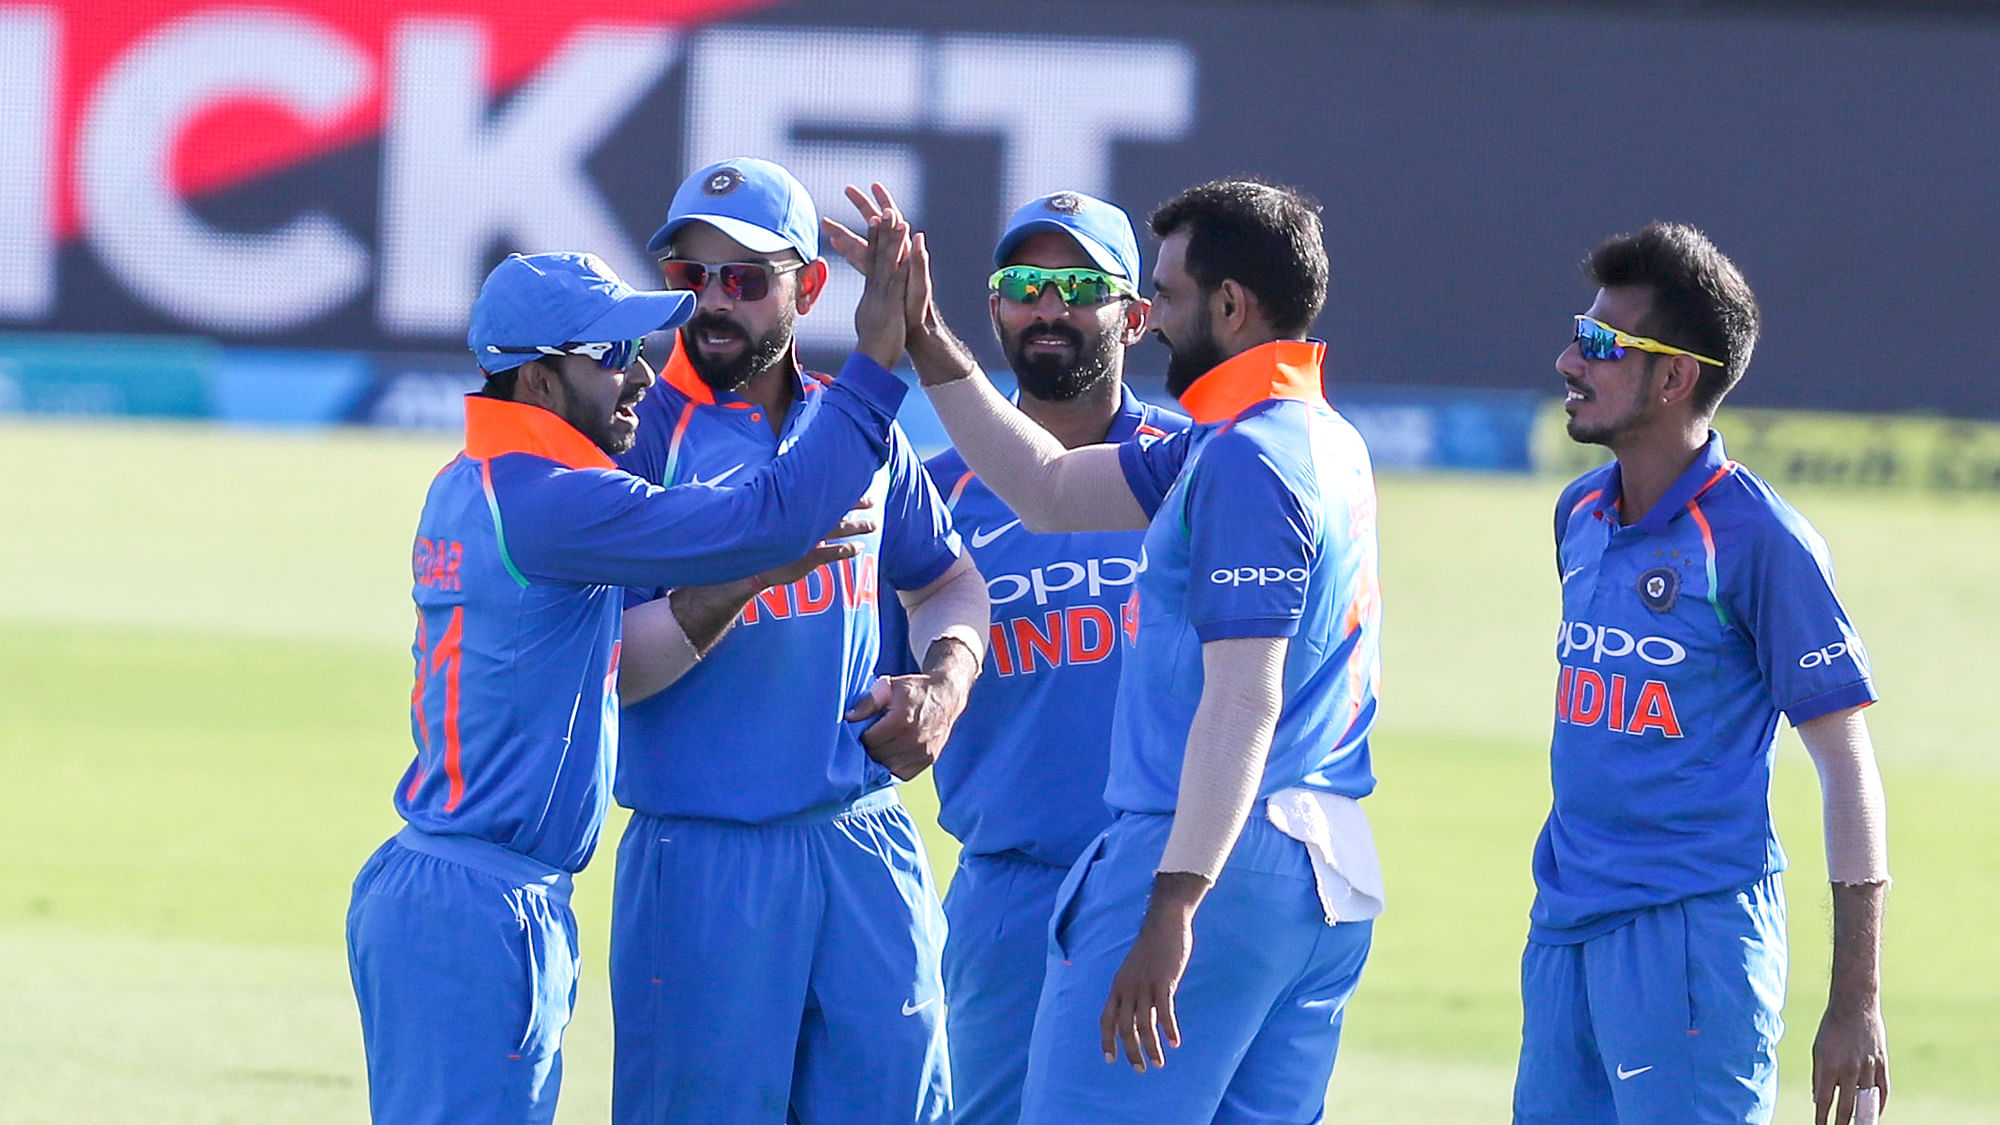 India beat New Zealand by 7 wickets to win the ODI series on Monday.